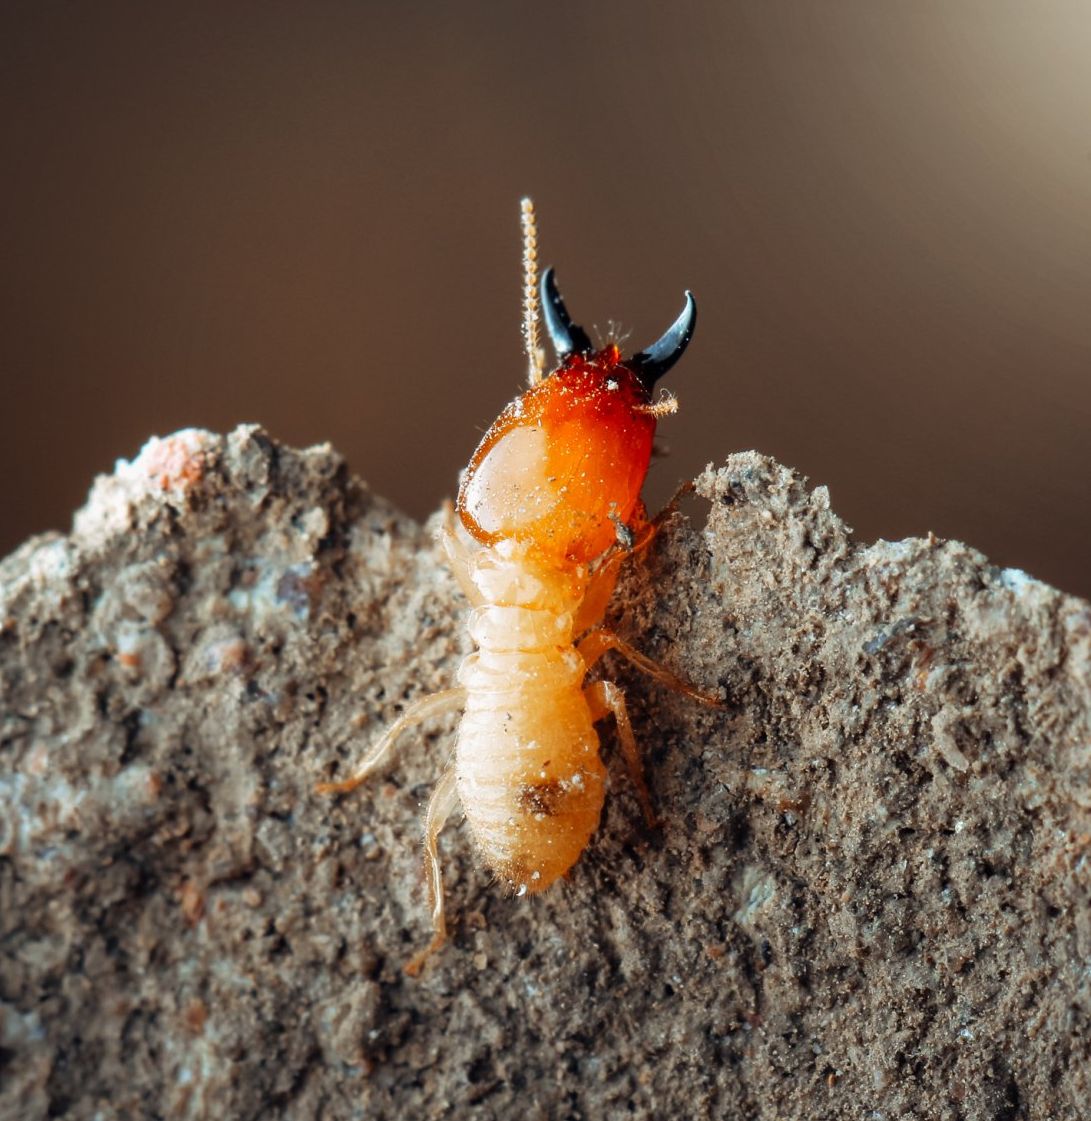 Atkins Pest Control Will Help Your Jefferson City, MO Business Get Rid of Pests Quickly.